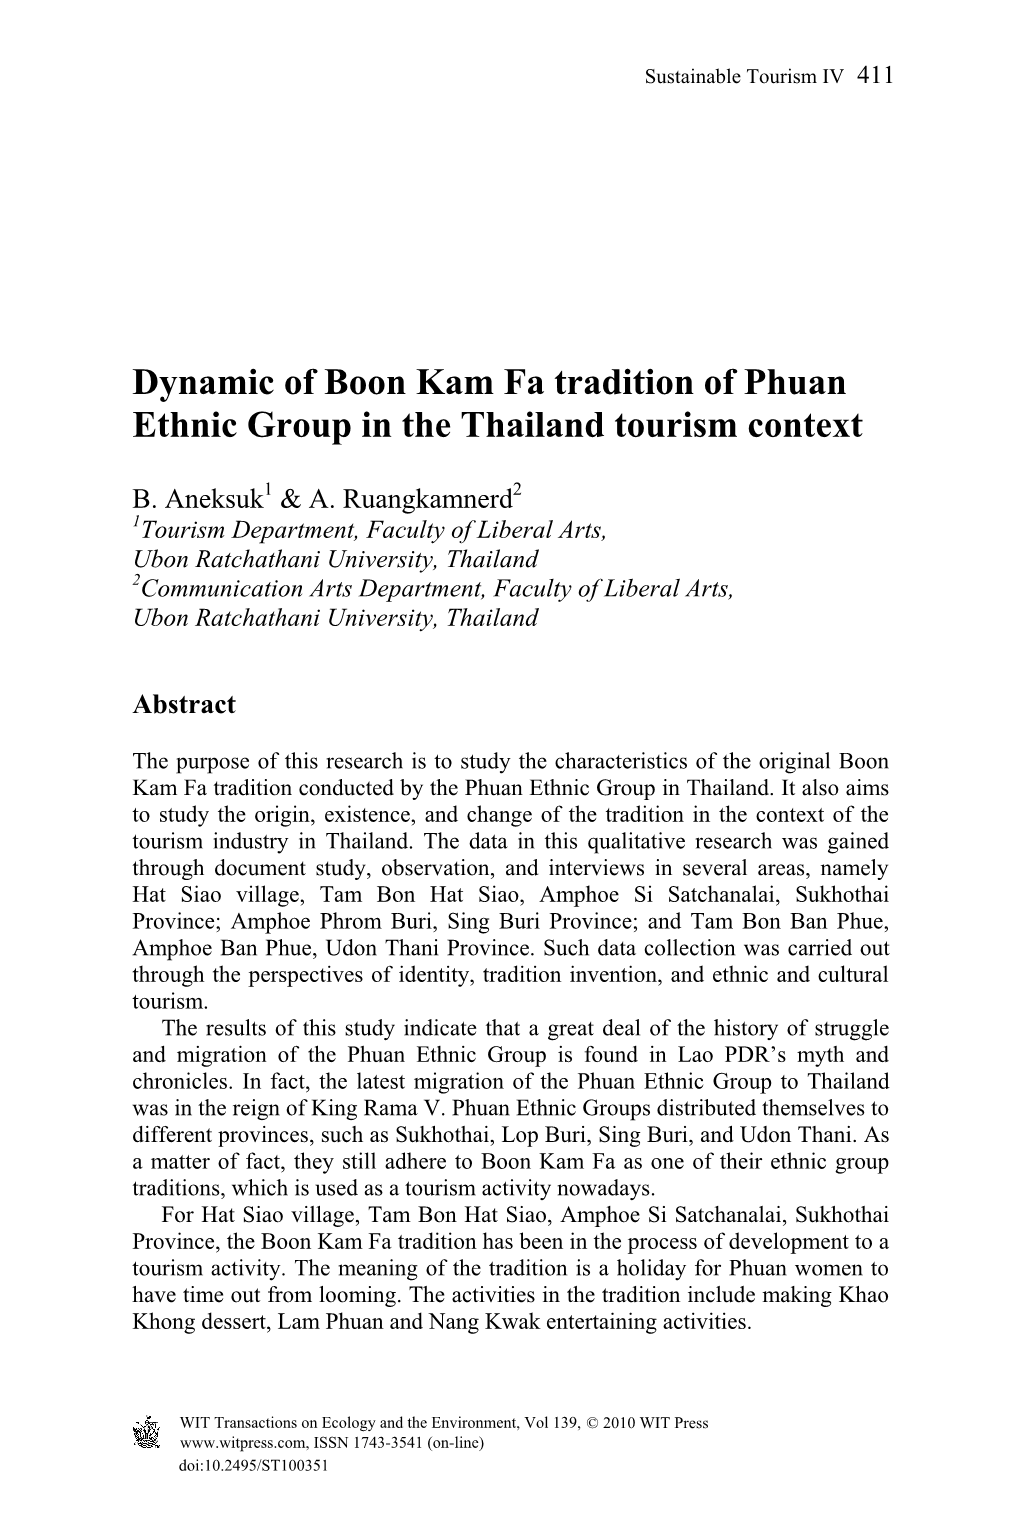 Dynamic of Boon Kam Fa Tradition of Phuan Ethnic Group in the Thailand Tourism Context